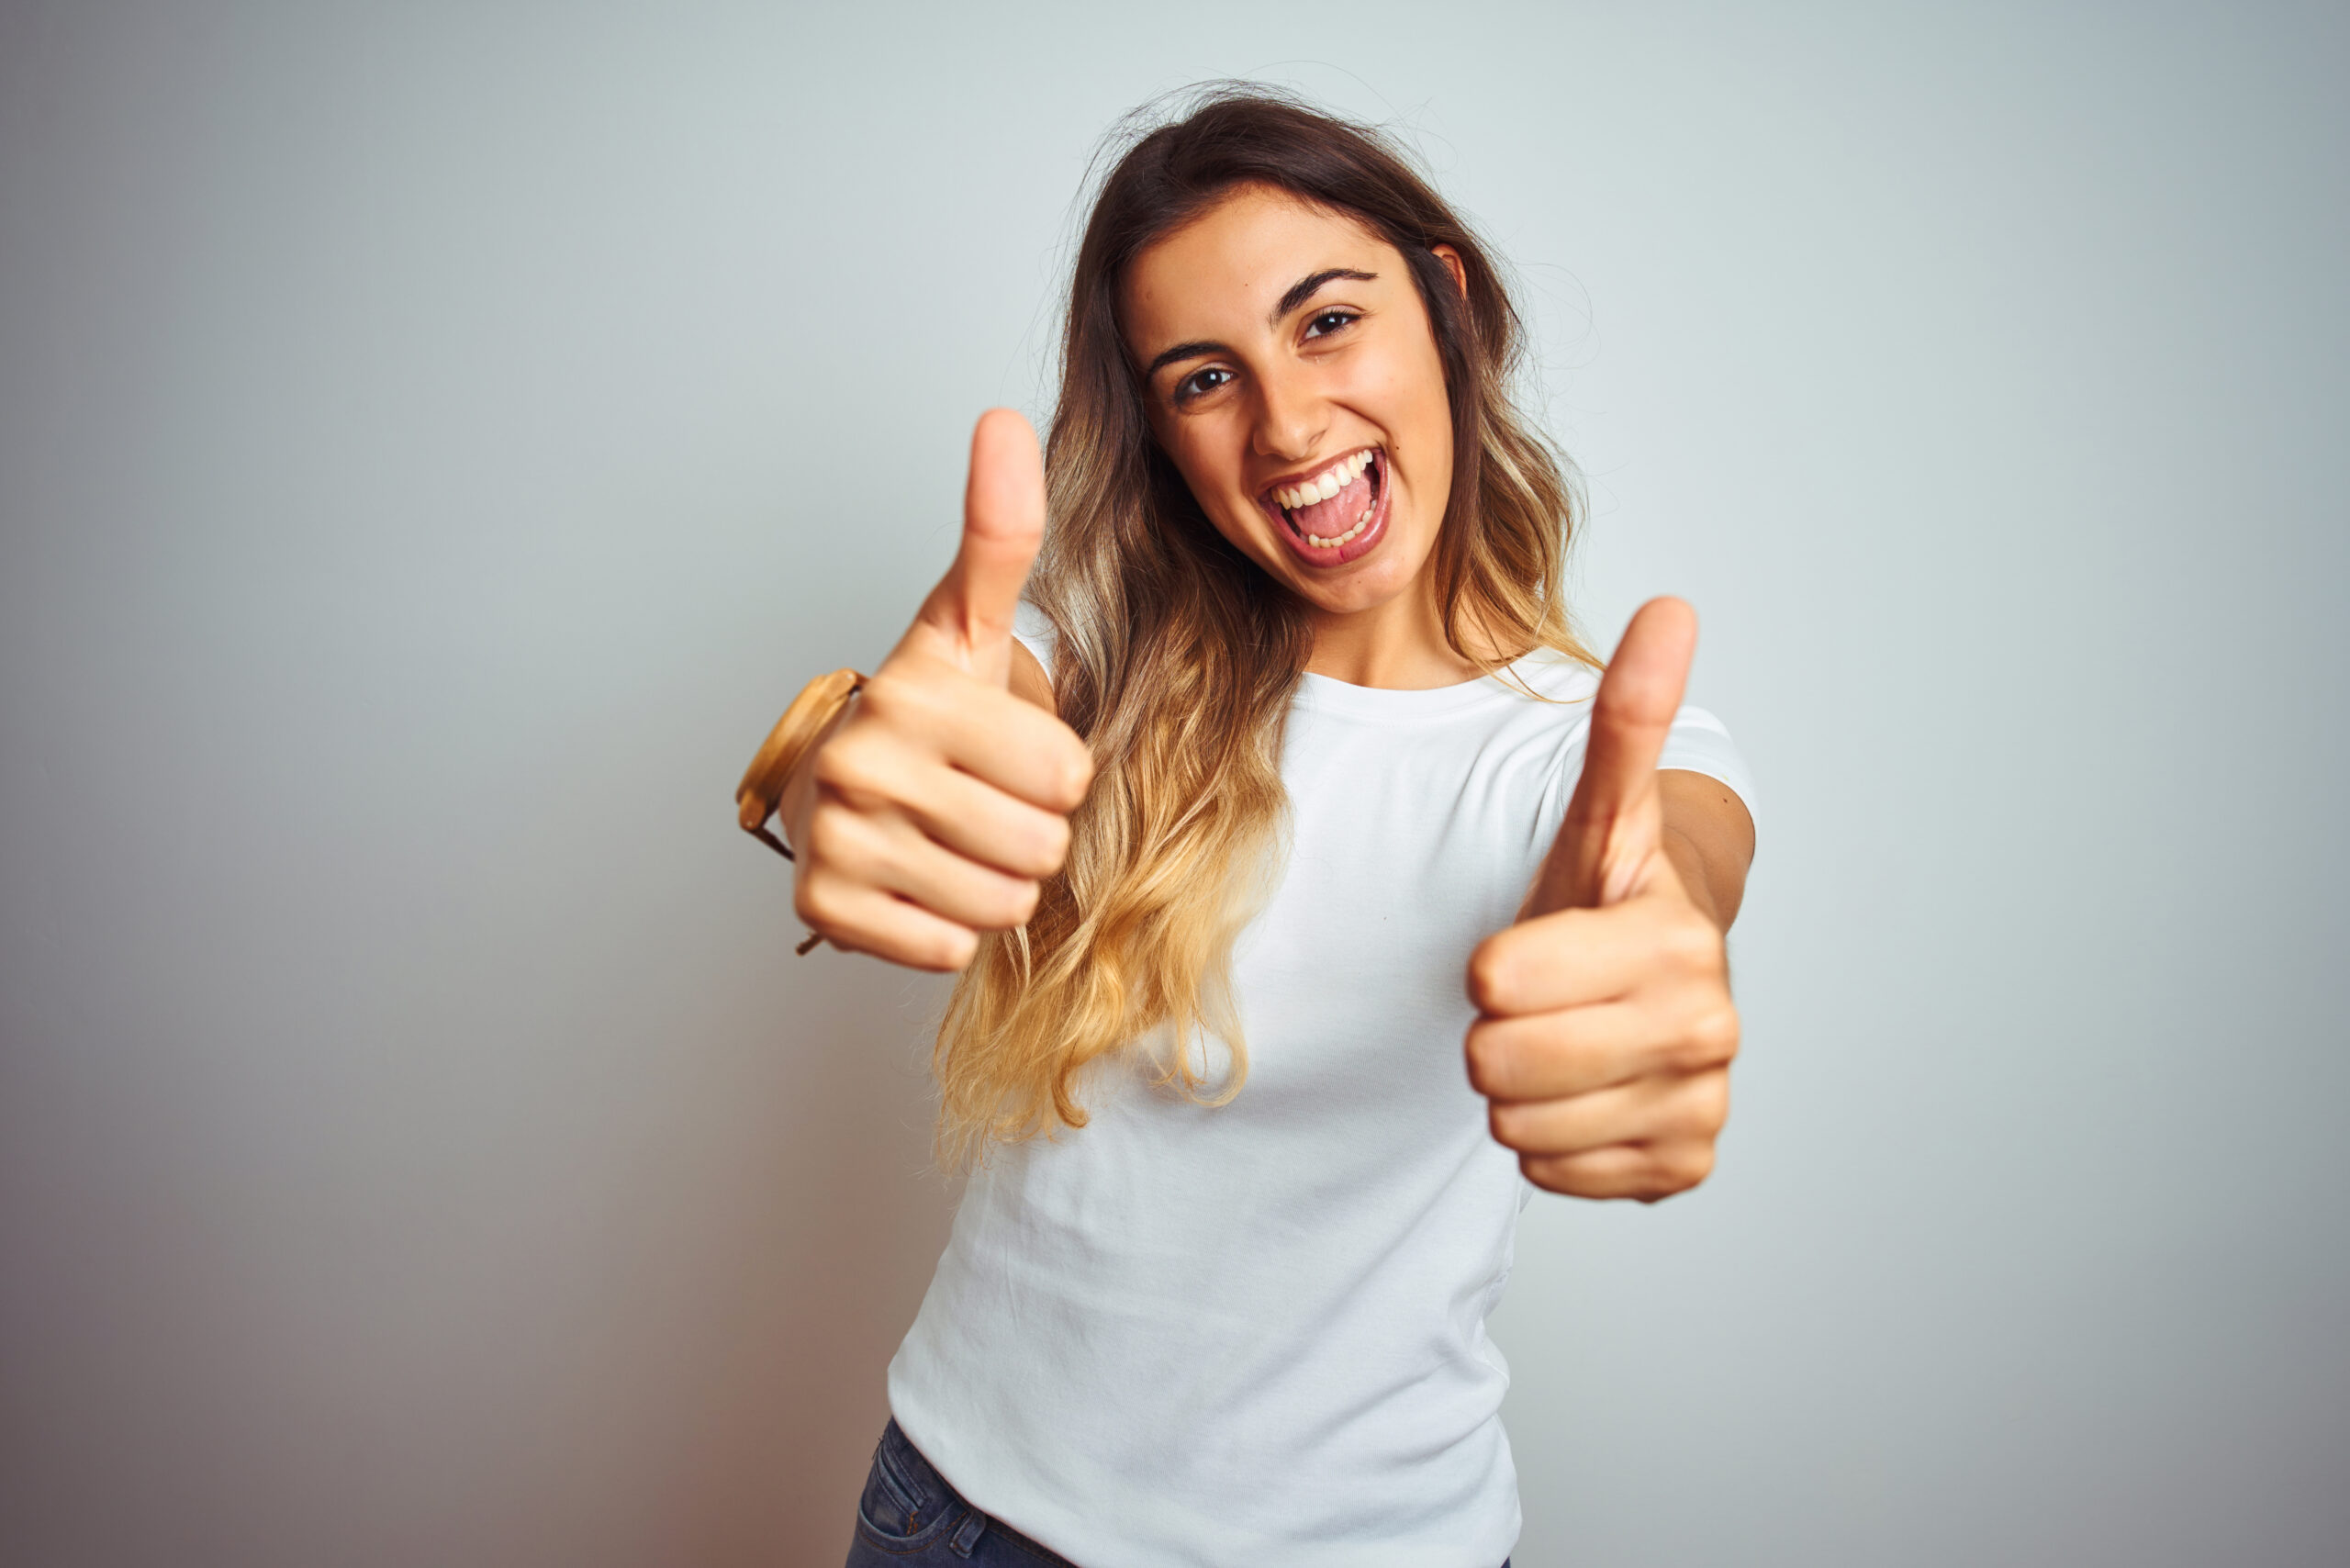 Young beautiful woman wearing casual white t-shirt over isolated background approving doing positive gesture with hand, thumbs up smiling and happy for success. Winner gesture.